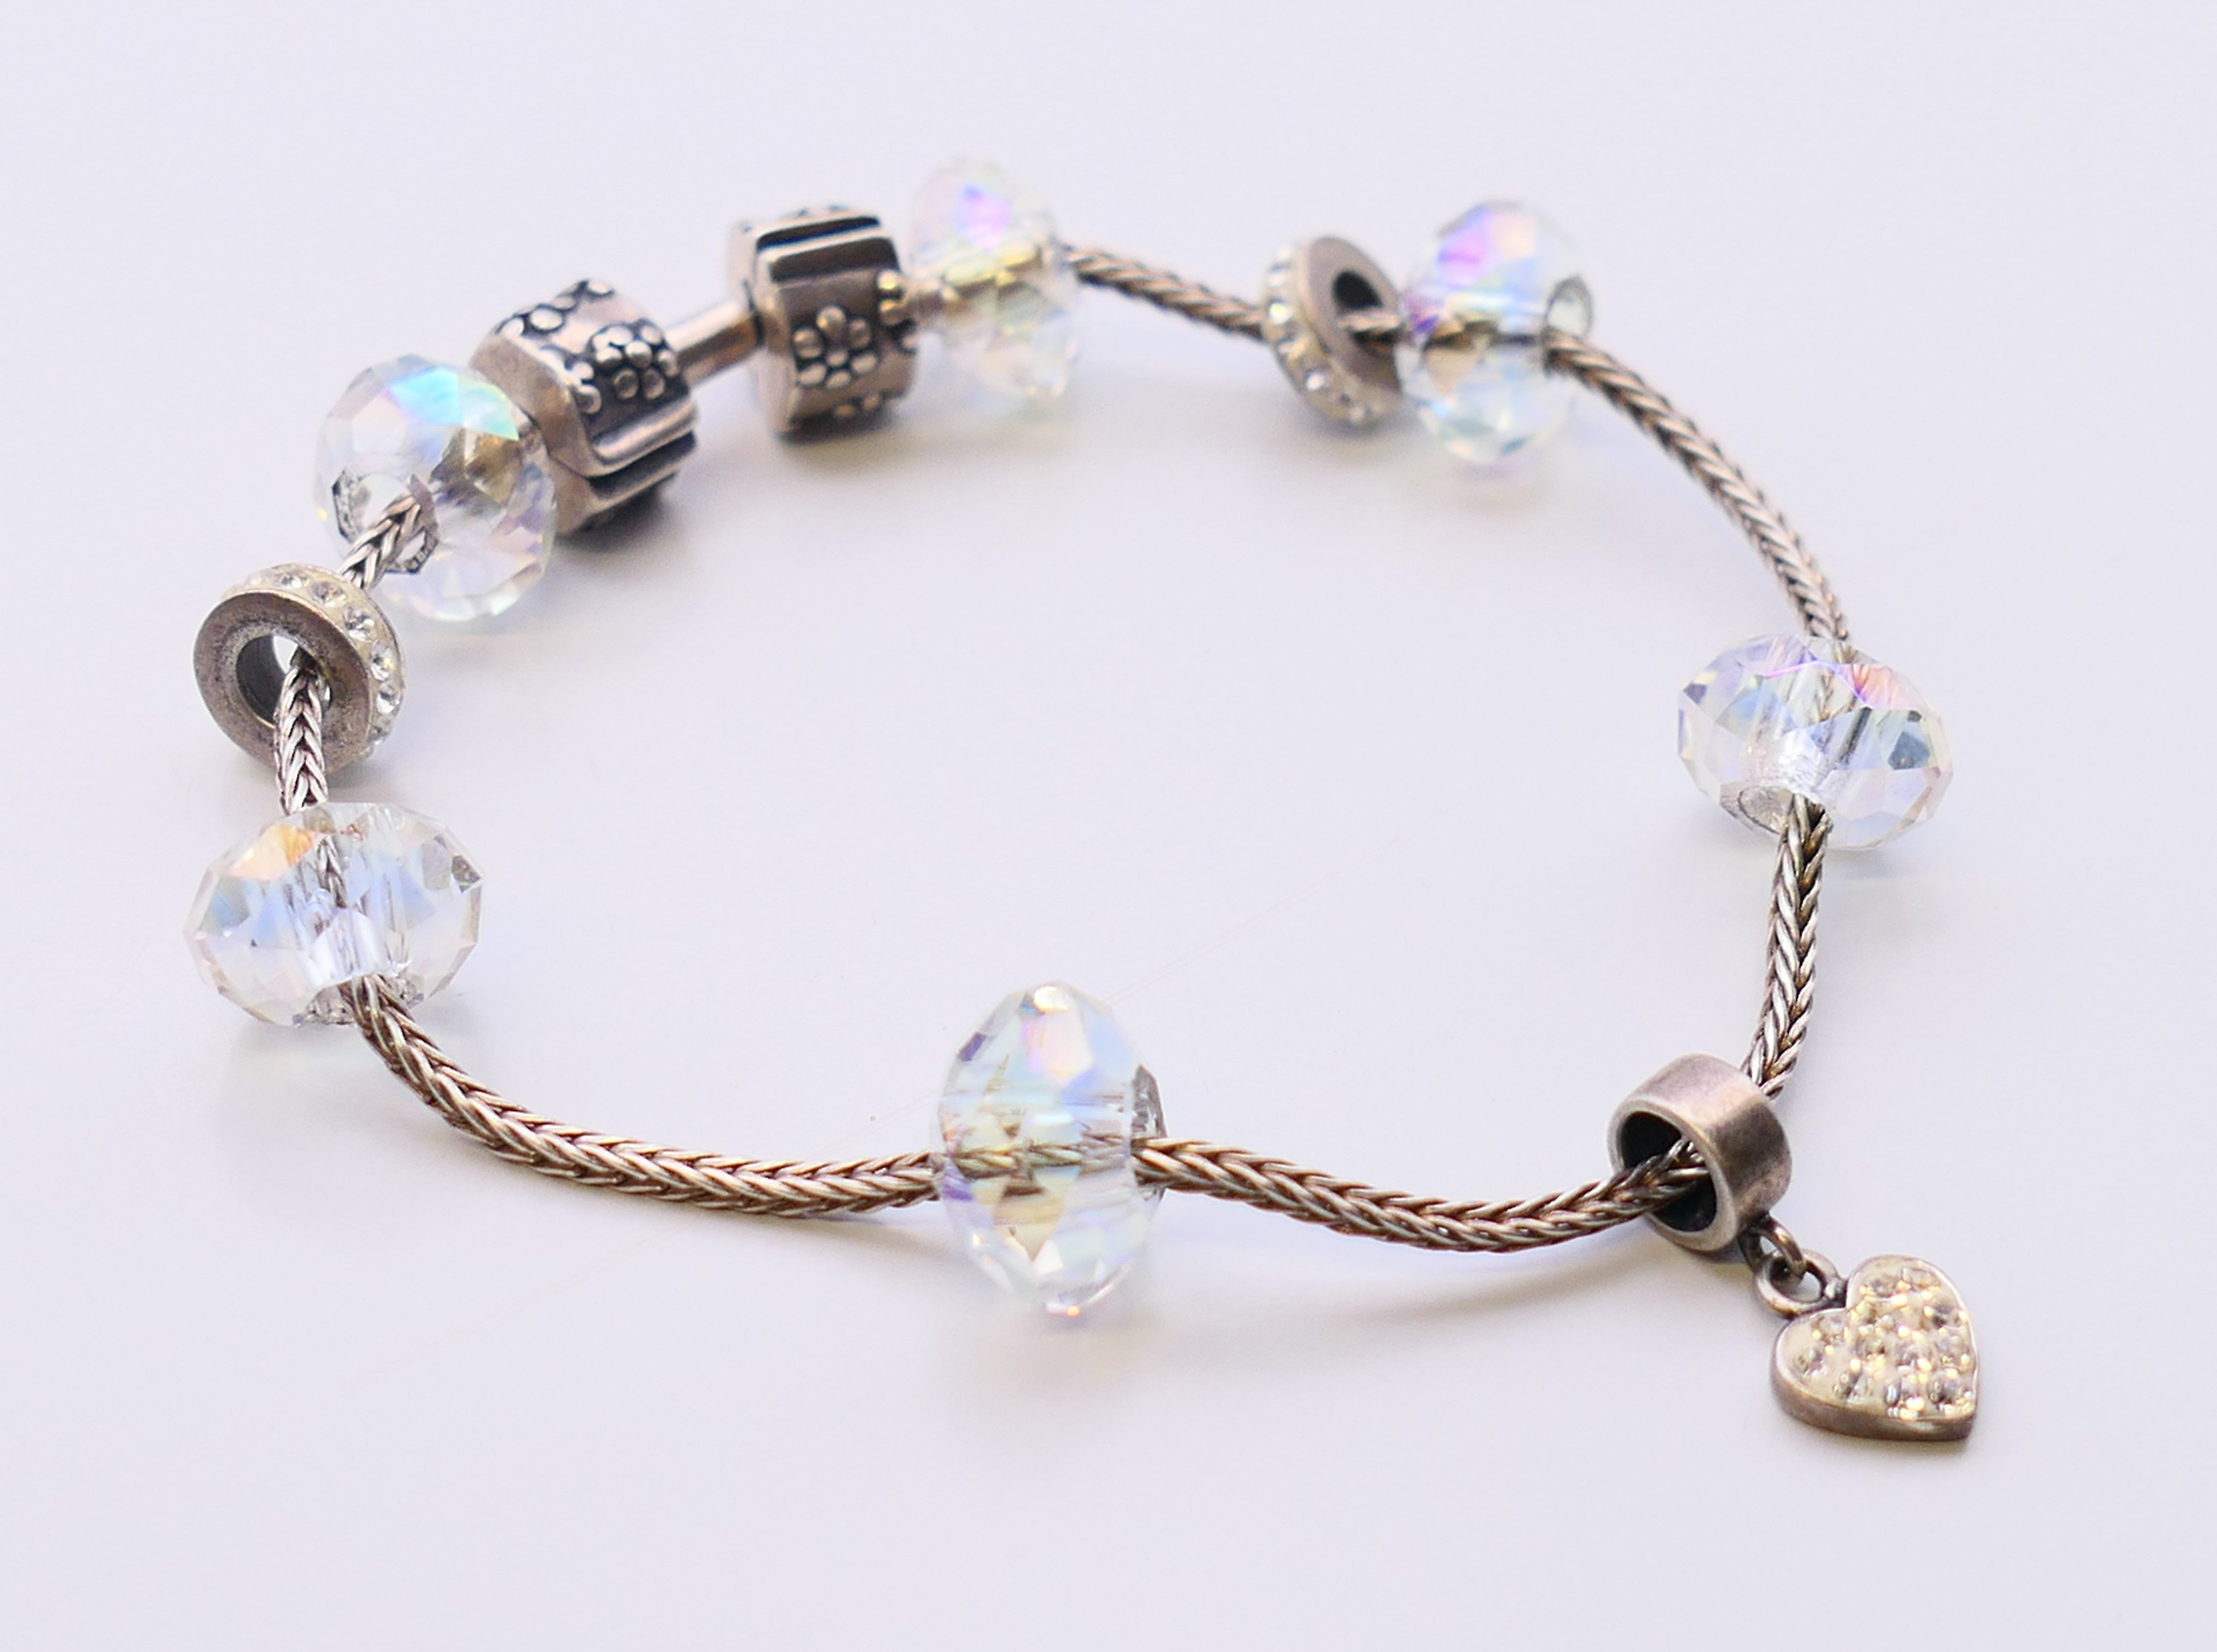 A silver bracelet with silver and bead charms. 17 cm long.